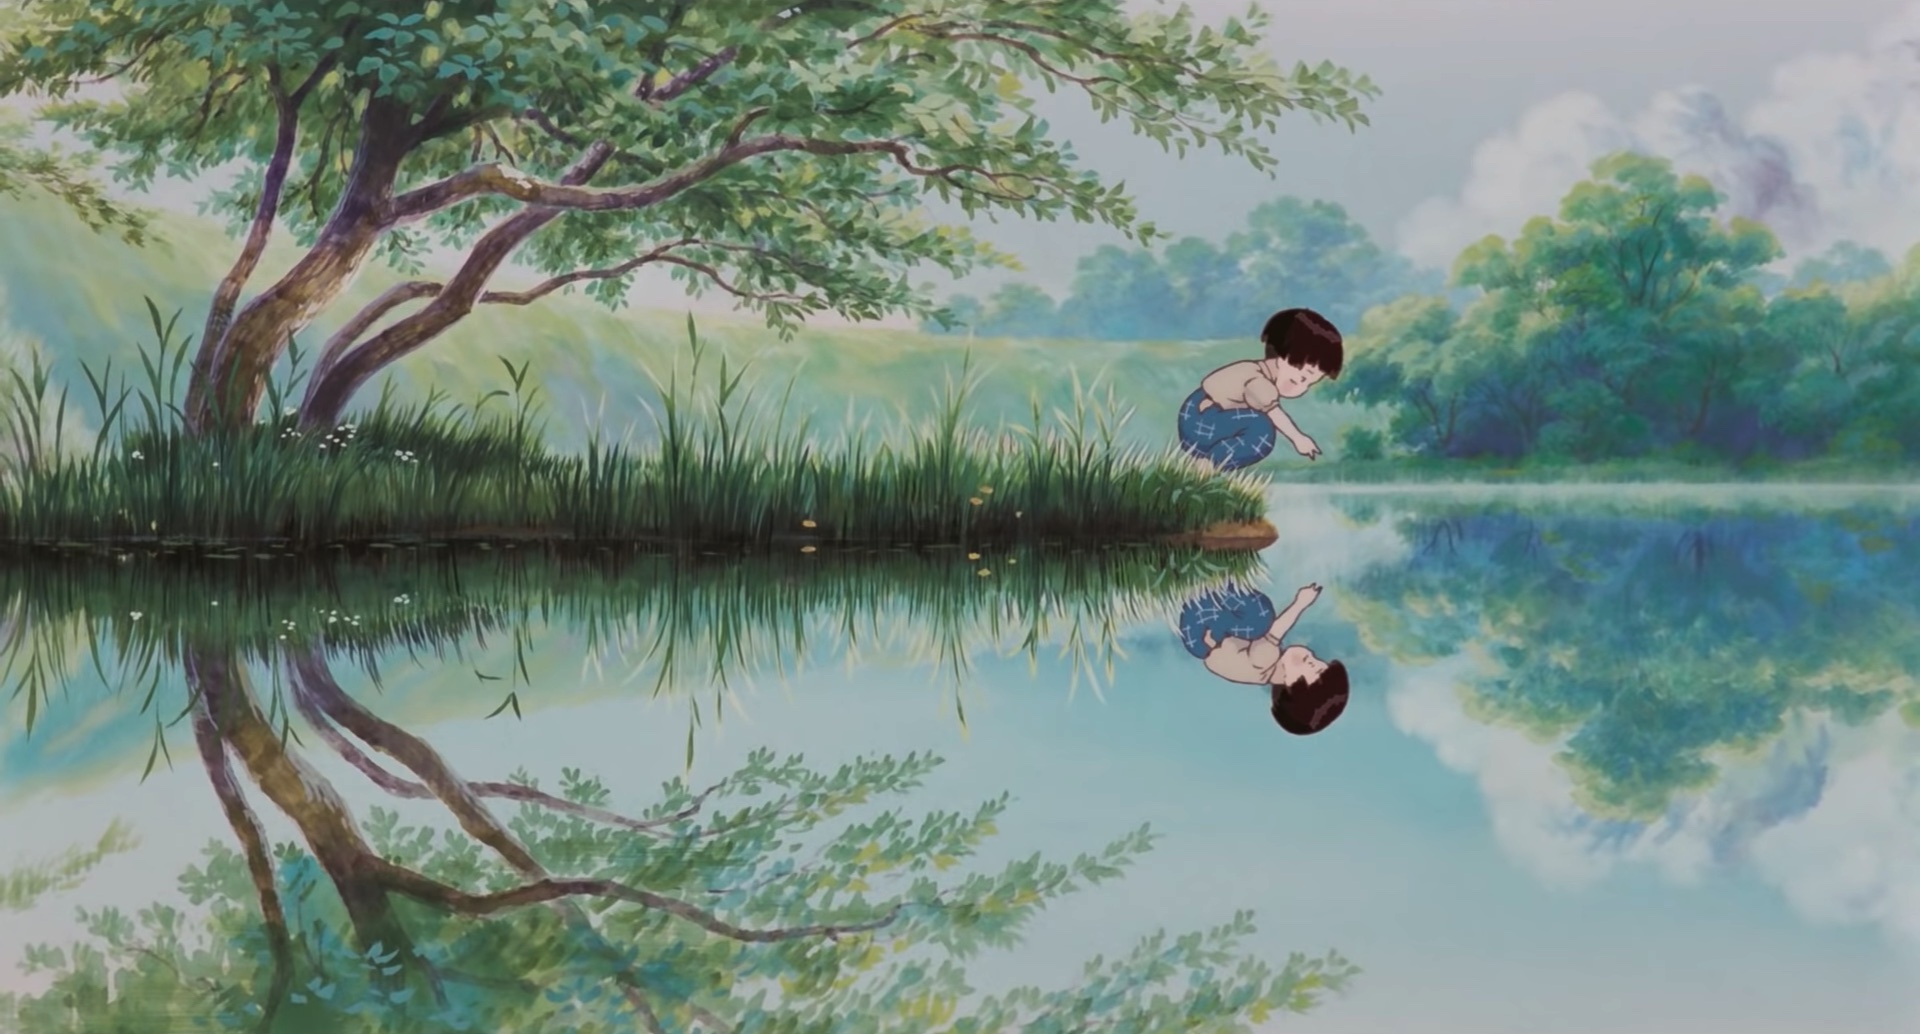 My father watched Grave of the Fireflies and said it wasn't sad. : r/ghibli